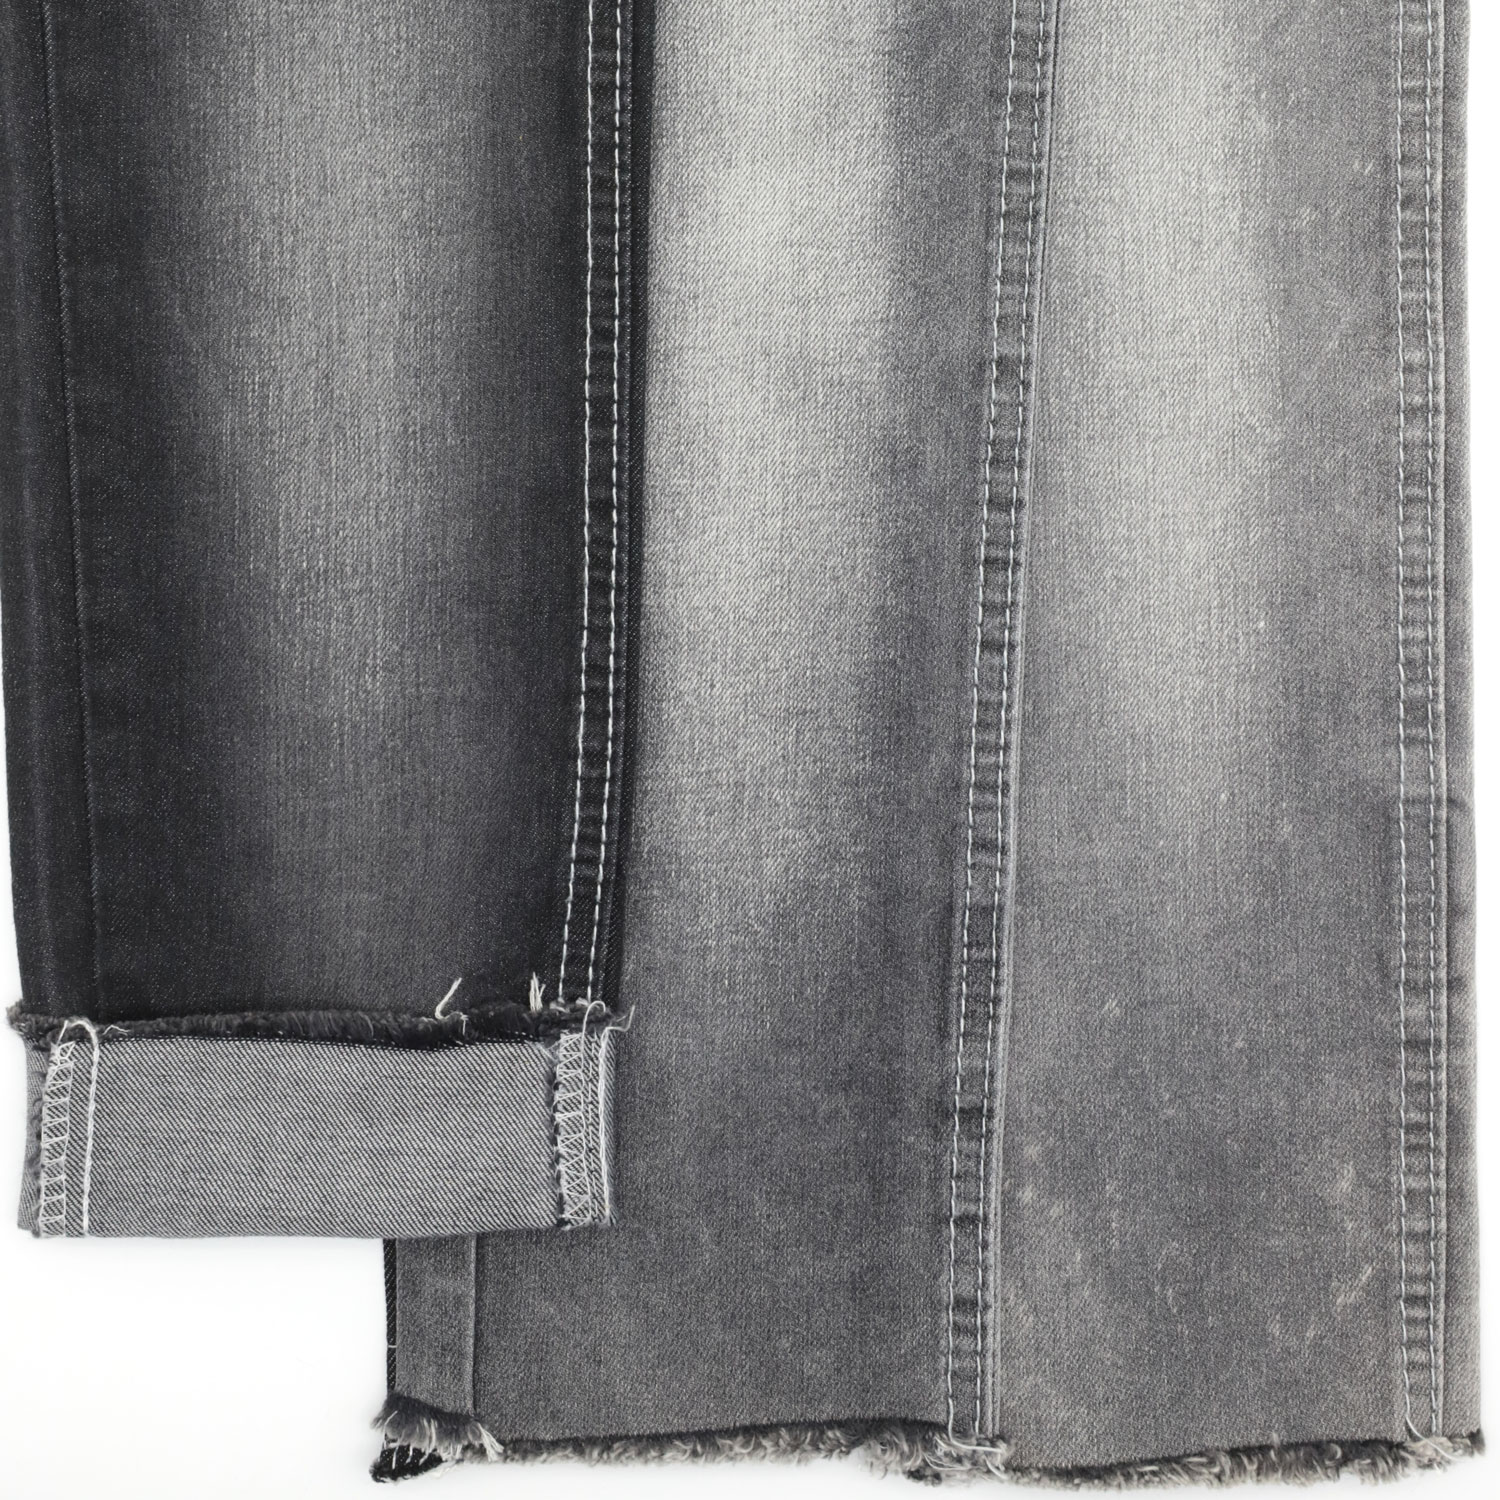 The Basics of Using the Non-stretch Denim Fabric 1